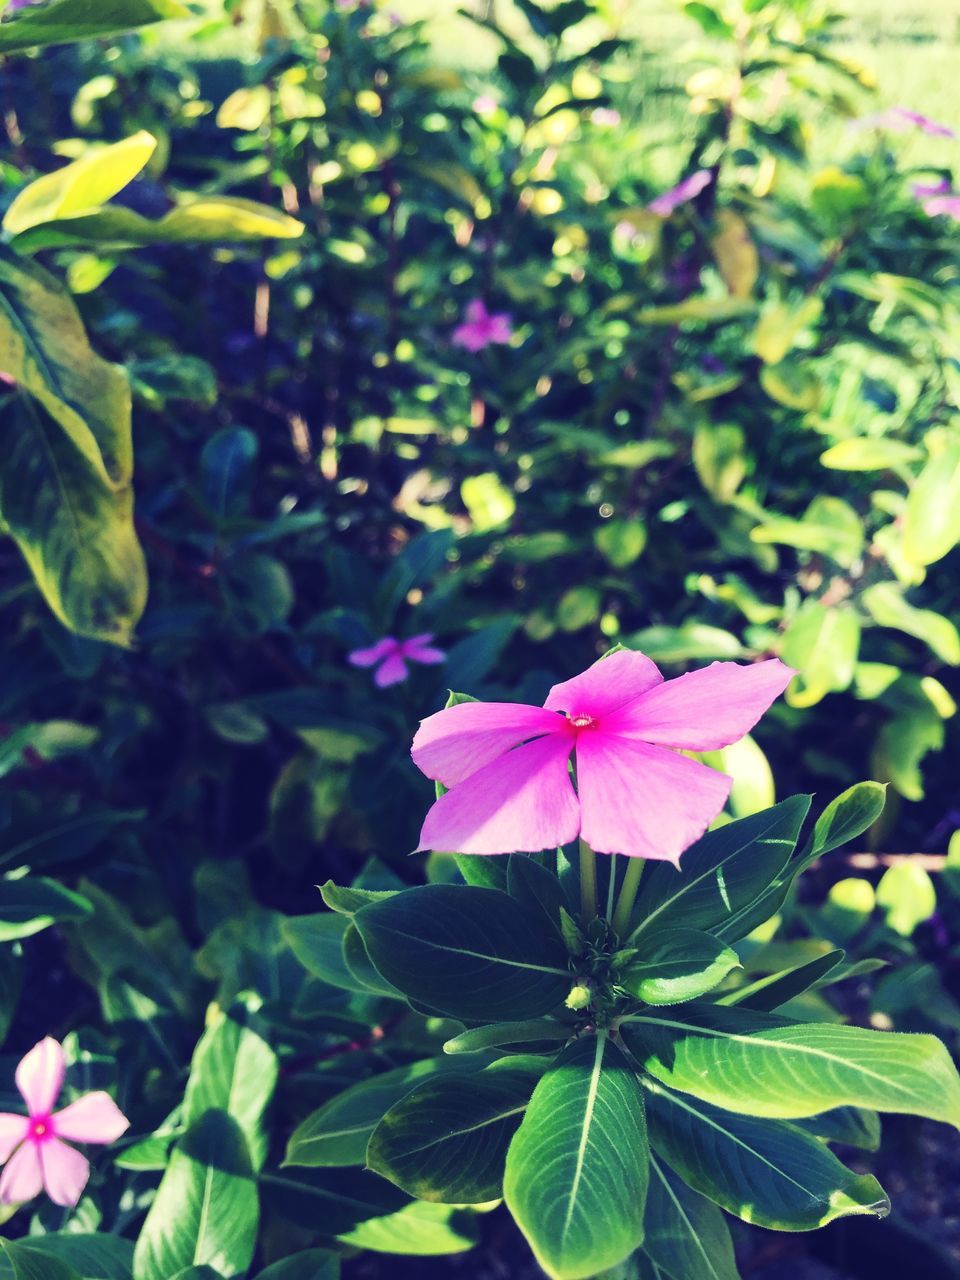 flower, freshness, growth, petal, leaf, fragility, pink color, beauty in nature, flower head, nature, plant, blooming, close-up, focus on foreground, green color, purple, in bloom, park - man made space, pink, day